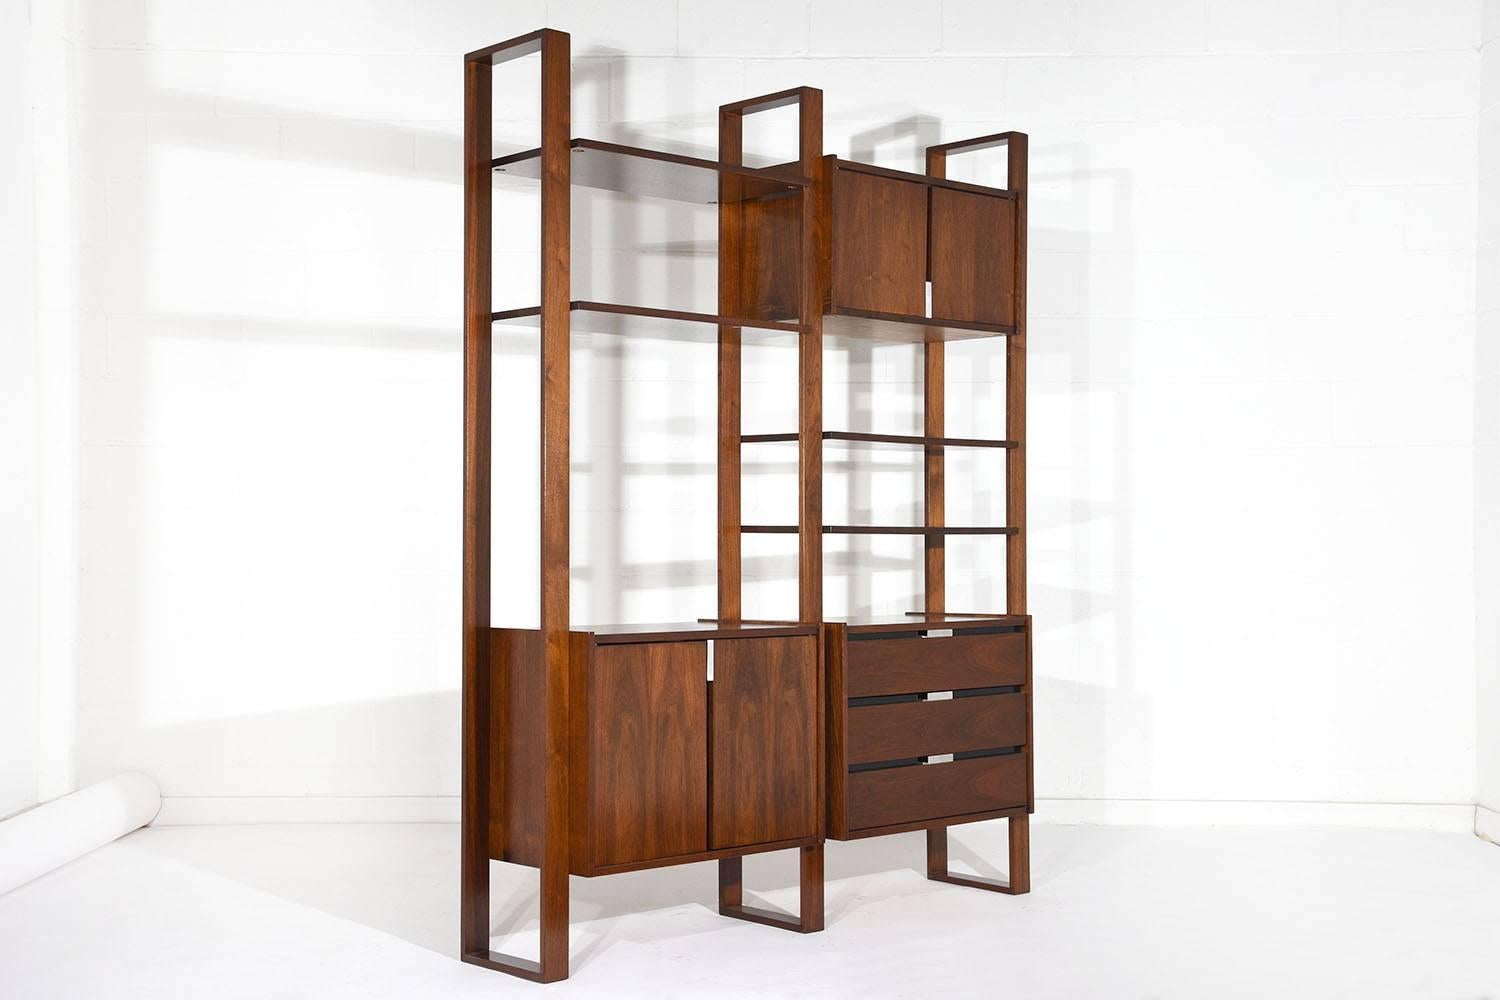 This 1960s Mid-Century Modern style freestanding wall unit bookcase is made from walnut wood stained in a rich, dark walnut color with a lacquered finish. There are two cabinet sections with ample storage space and are opened by the aluminium pulls.